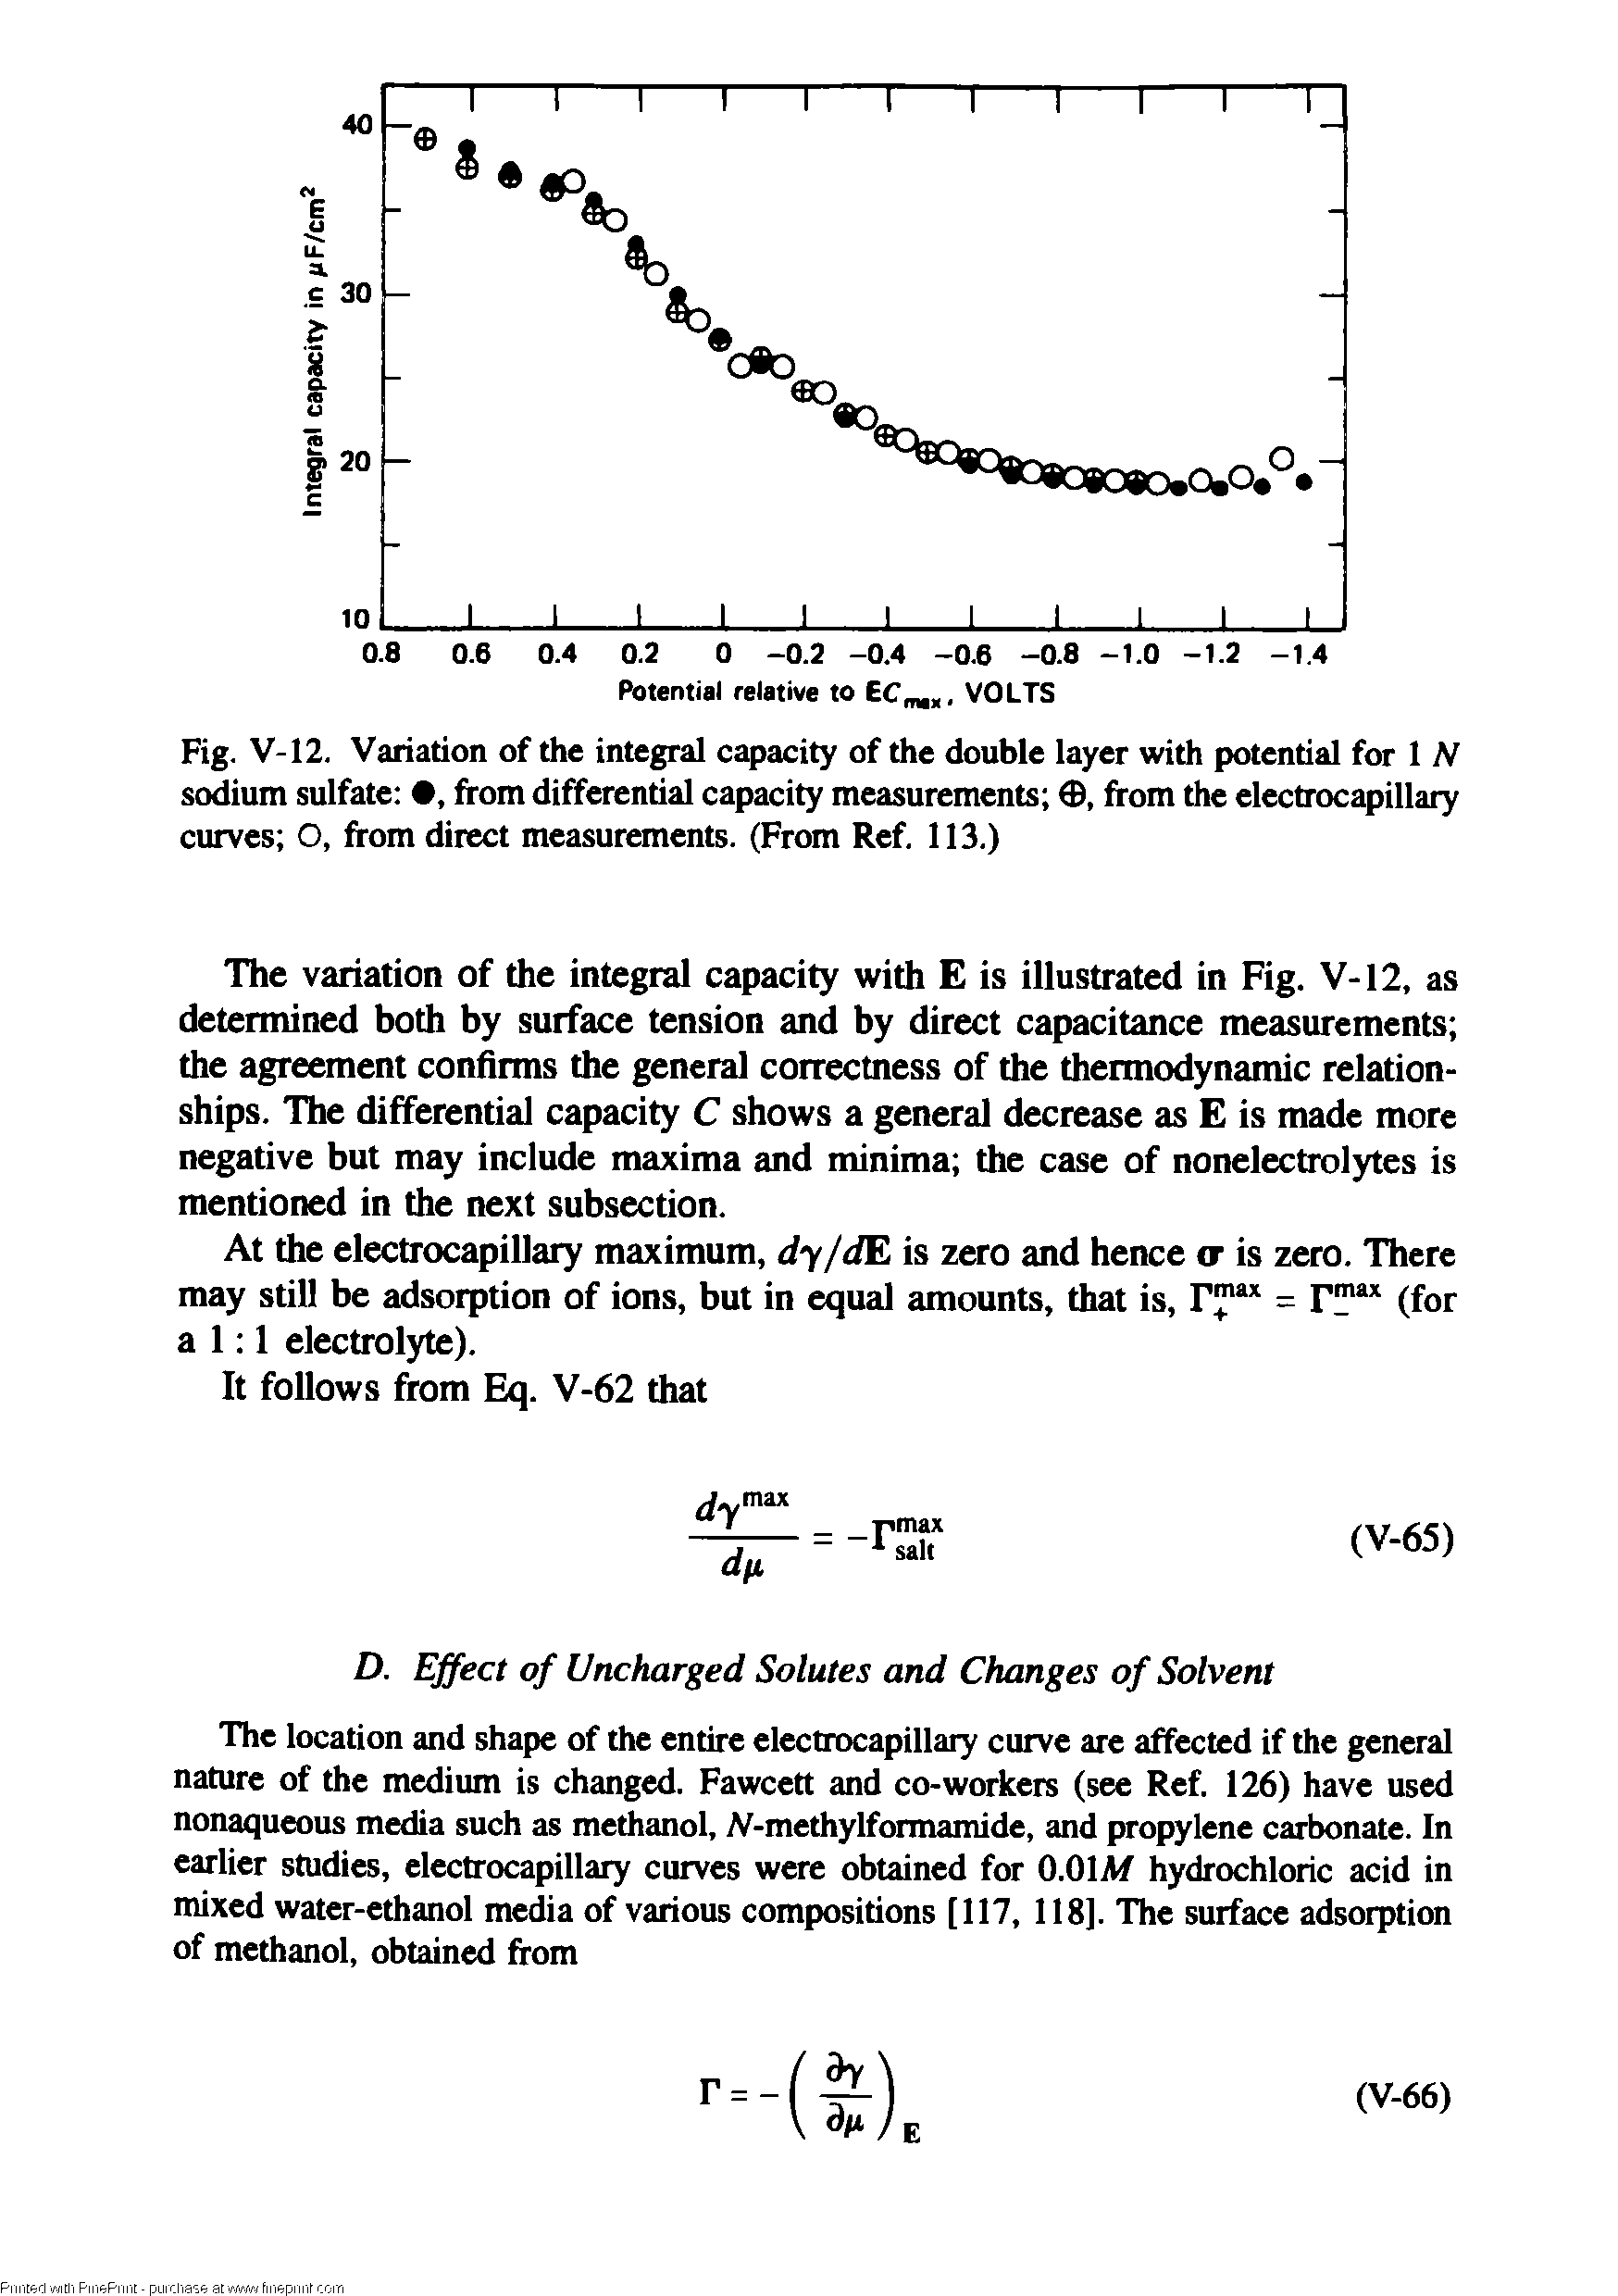 Fig. V-12. Variation of the integral capacity of the double layer with potential for 1 N sodium sulfate , from differential capacity measurements 0, from the electrocapillary curves O, from direct measurements. (From Ref. 113.)...